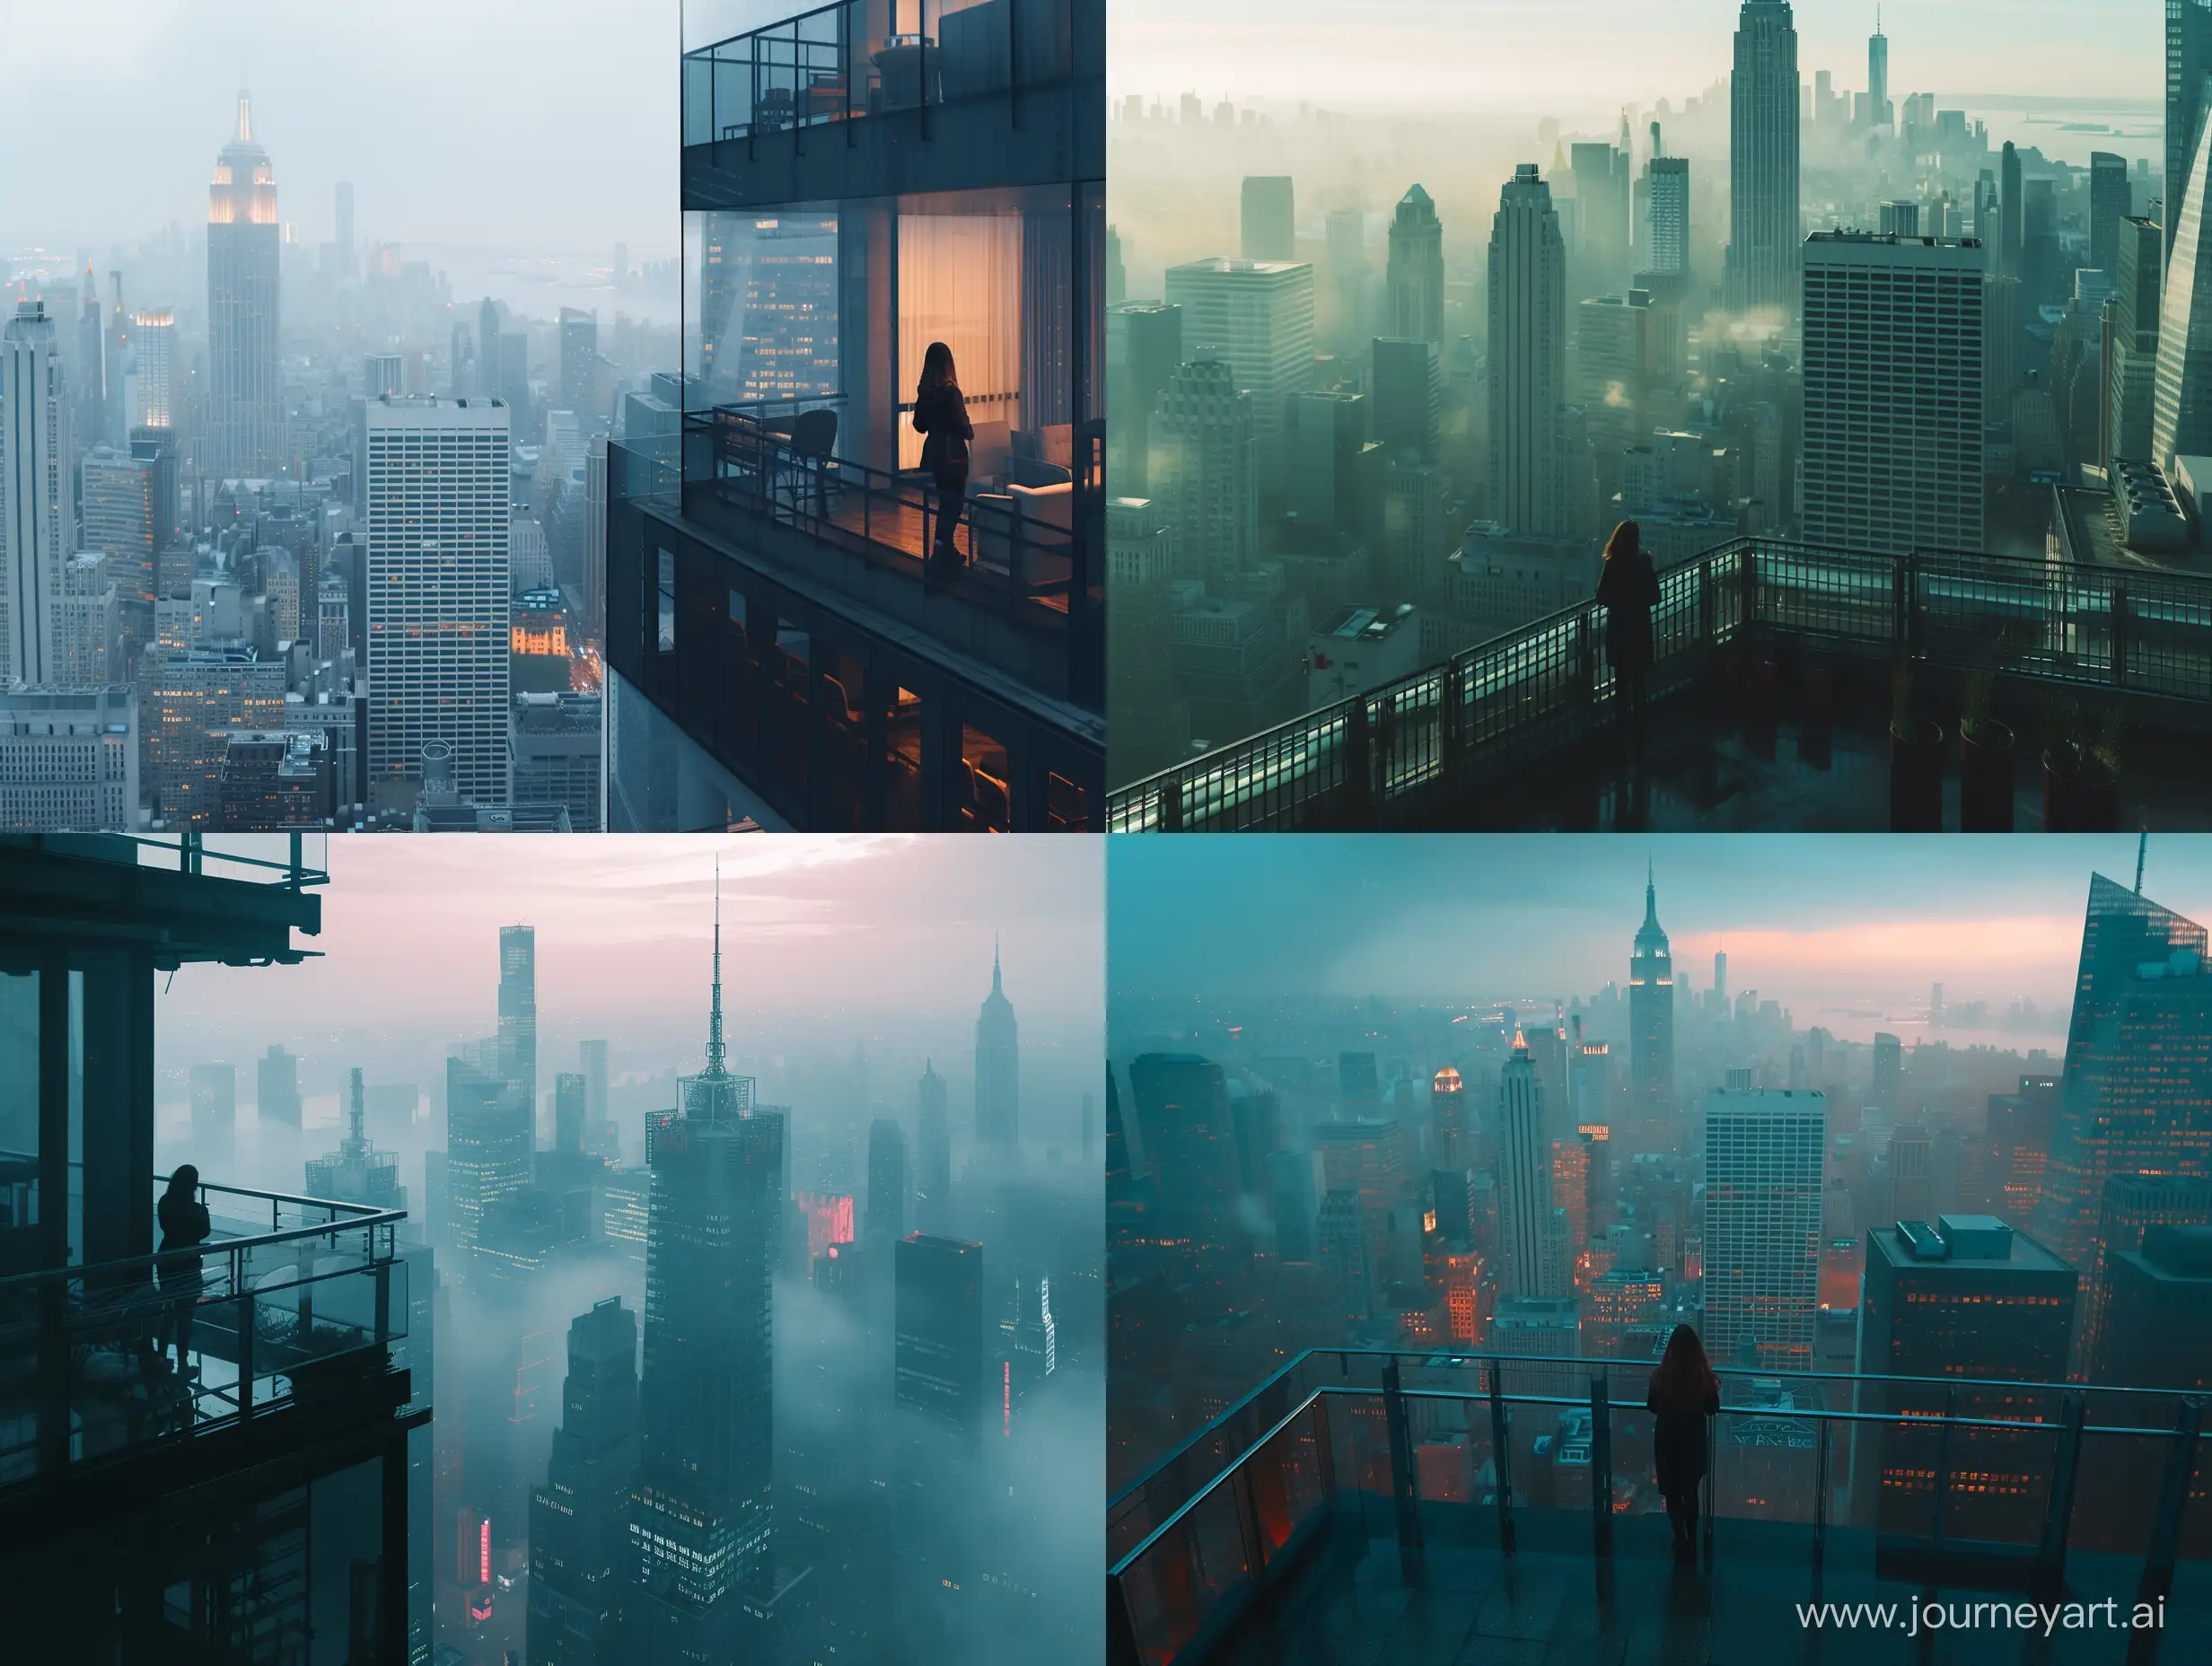 a bustling new new york city, the photo is bathed in natural lighting, relaxing setting. Shot in 4k with a high end DSLR camera. such as a Canon EOS R5 with a 50mm f/1. 2 lens, architecture, drone view, skyline, a woman is standing on a balcony, vivid, foggy, dystopian, science fiction,
